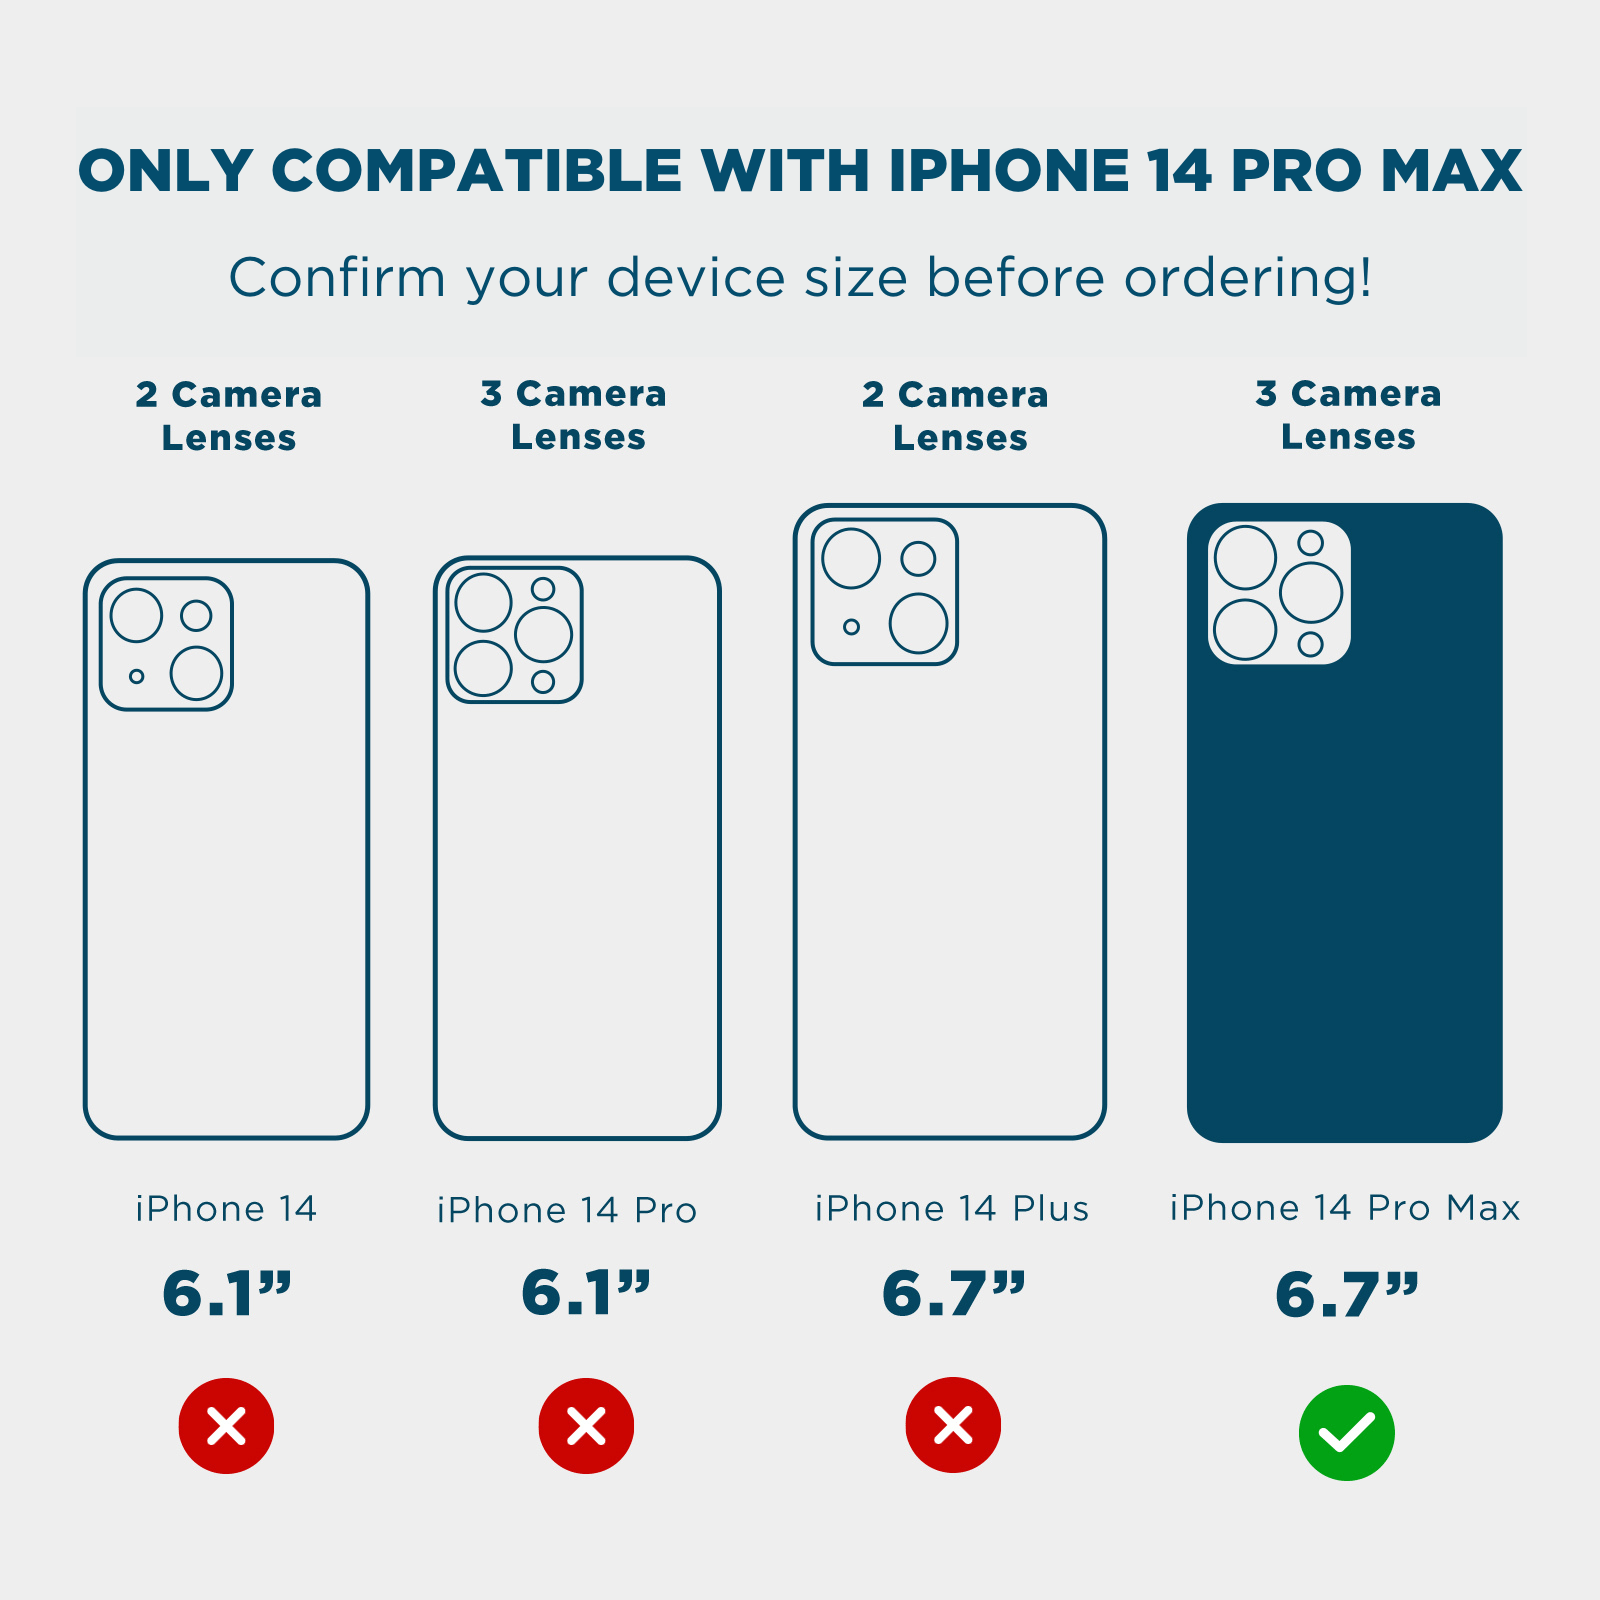 iPhone 14 Pro, iPhone 14 Pro Max Display Sizes Shared, Will Be